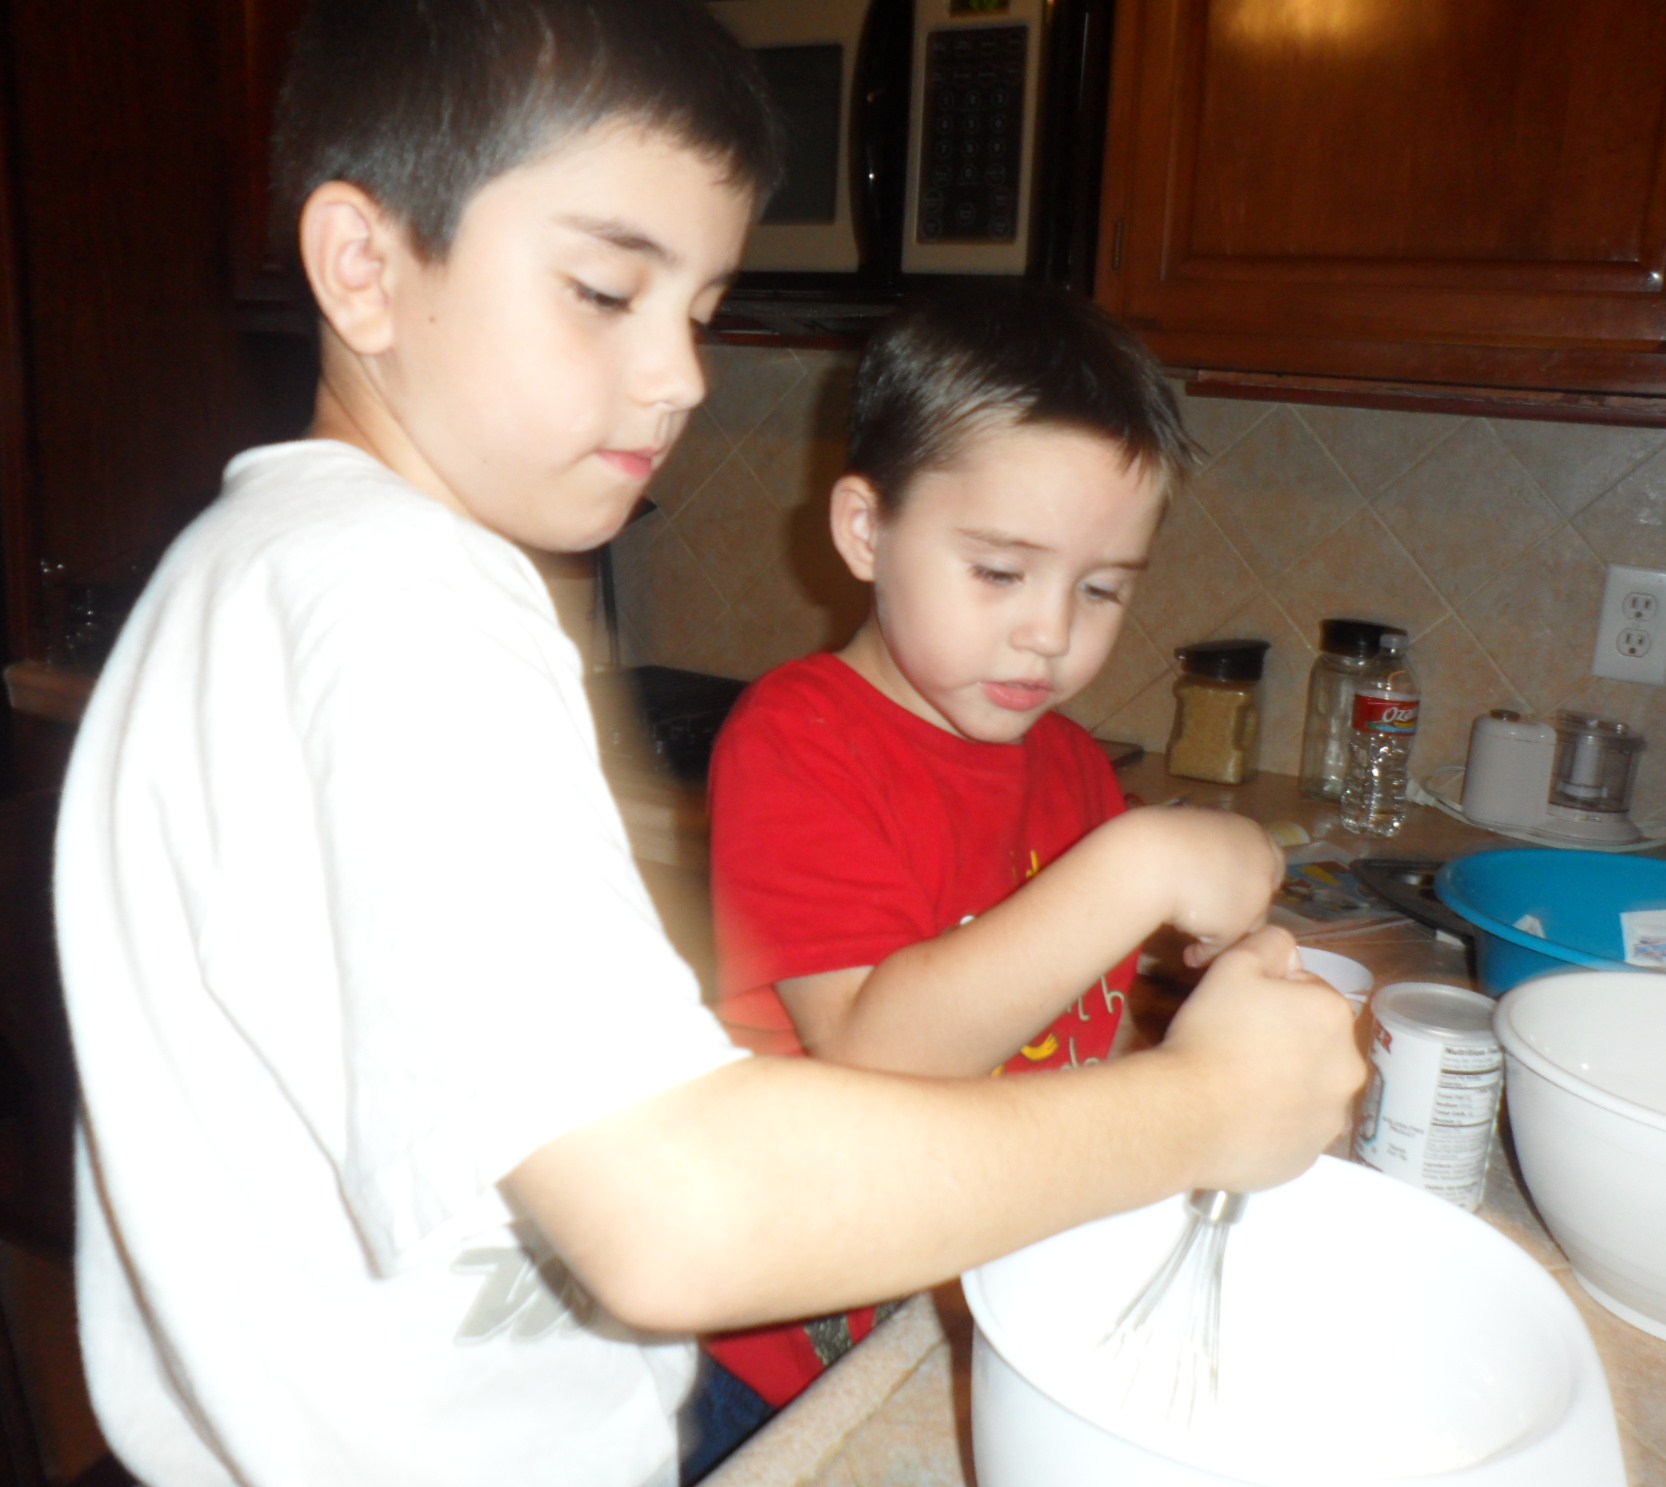 First the boys whisked together the dry ingredients...flour, baking powder, and salt.